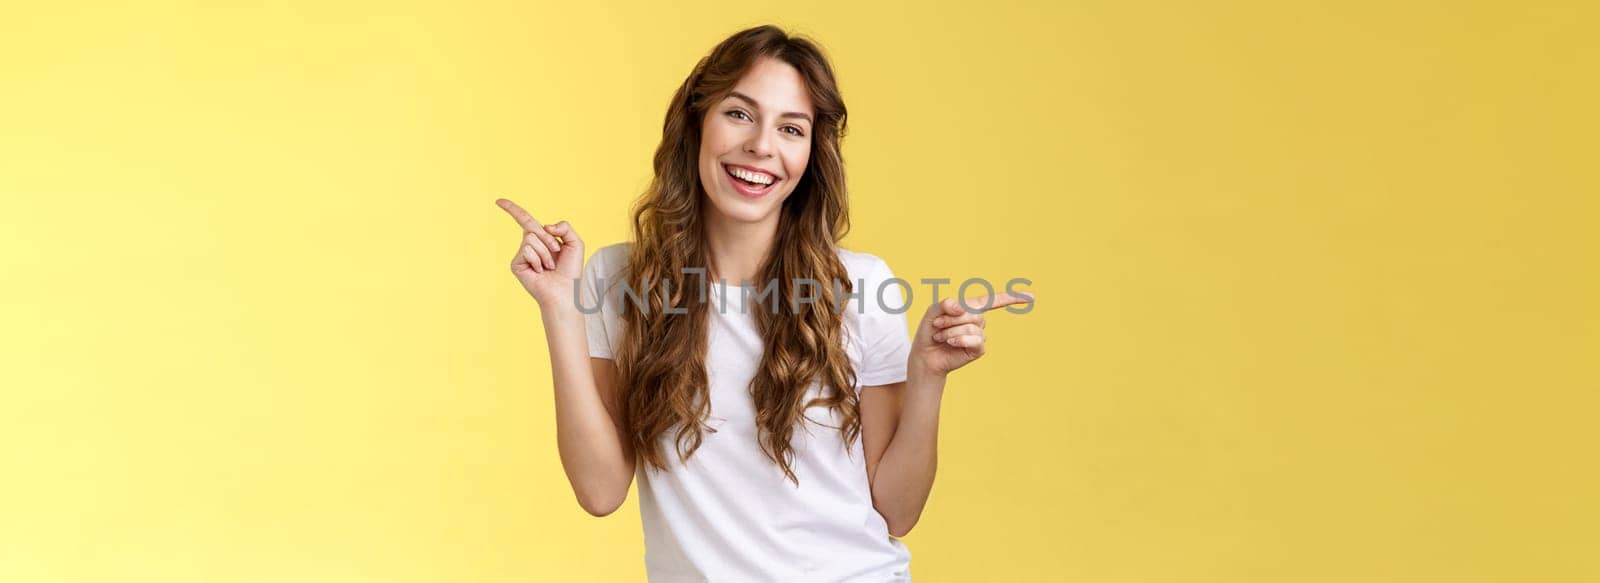 Girl have two suggestions pointing sideways. Cheerful charismatic curly-haired attractive woman pointing left right index fingers introduce promo products smiling broadly lively recommend ad.